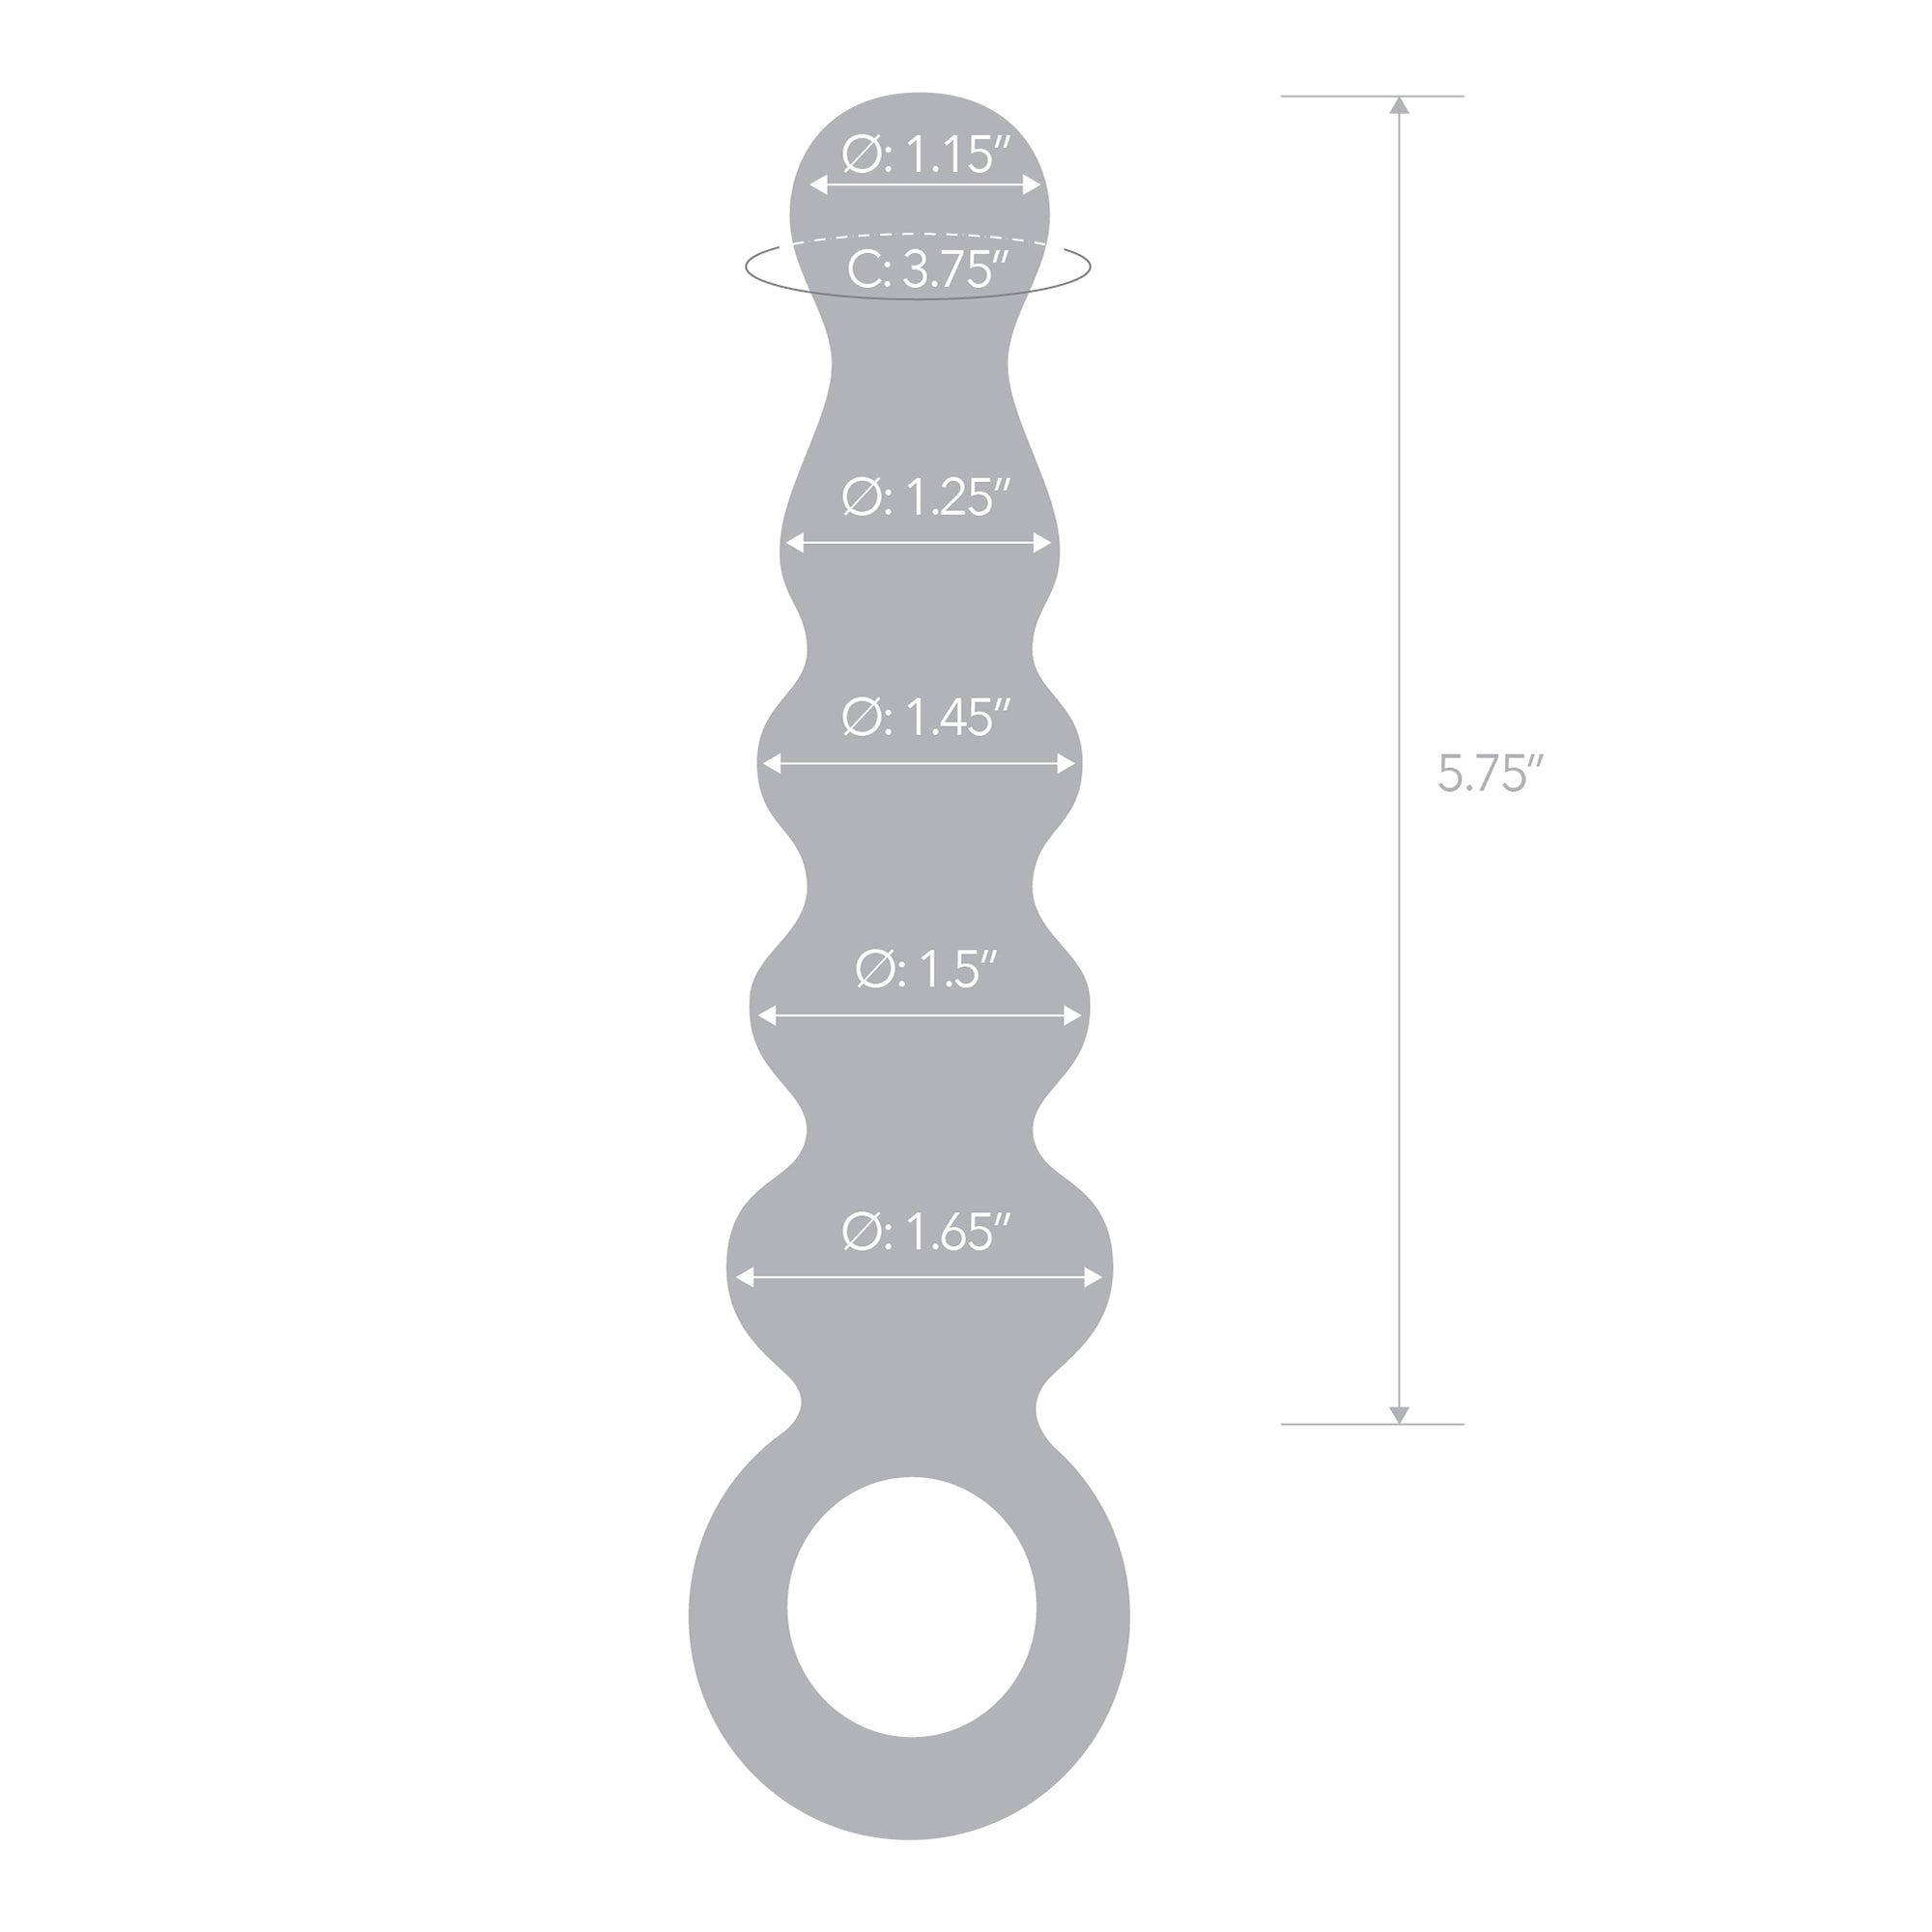 Specifications of the Gläs Quintessence Beaded Anal Slider Glass Anal Toy